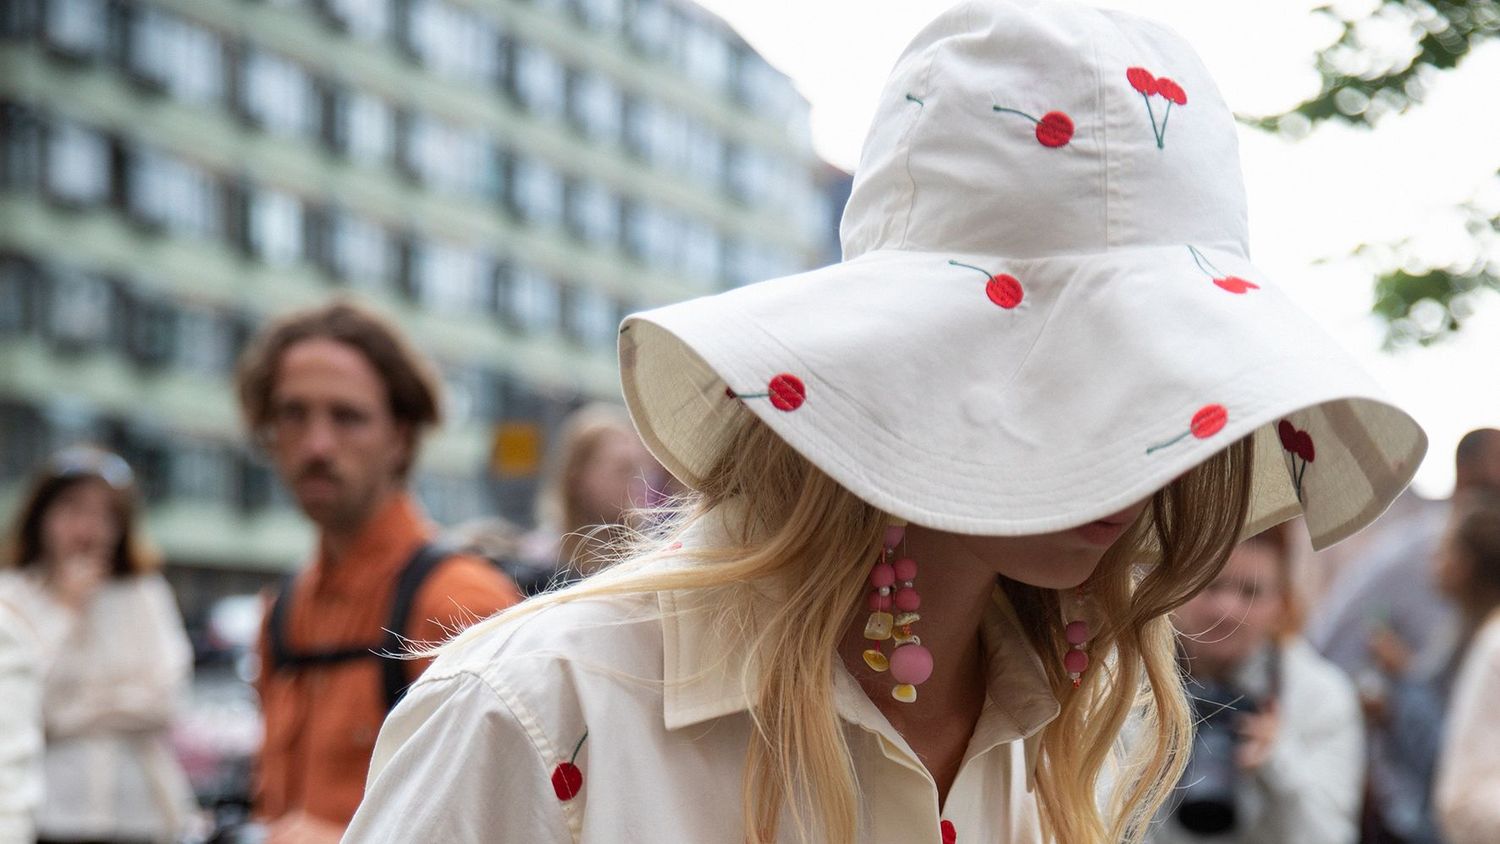 10 must-have rain hats to avoid sudden showers this season